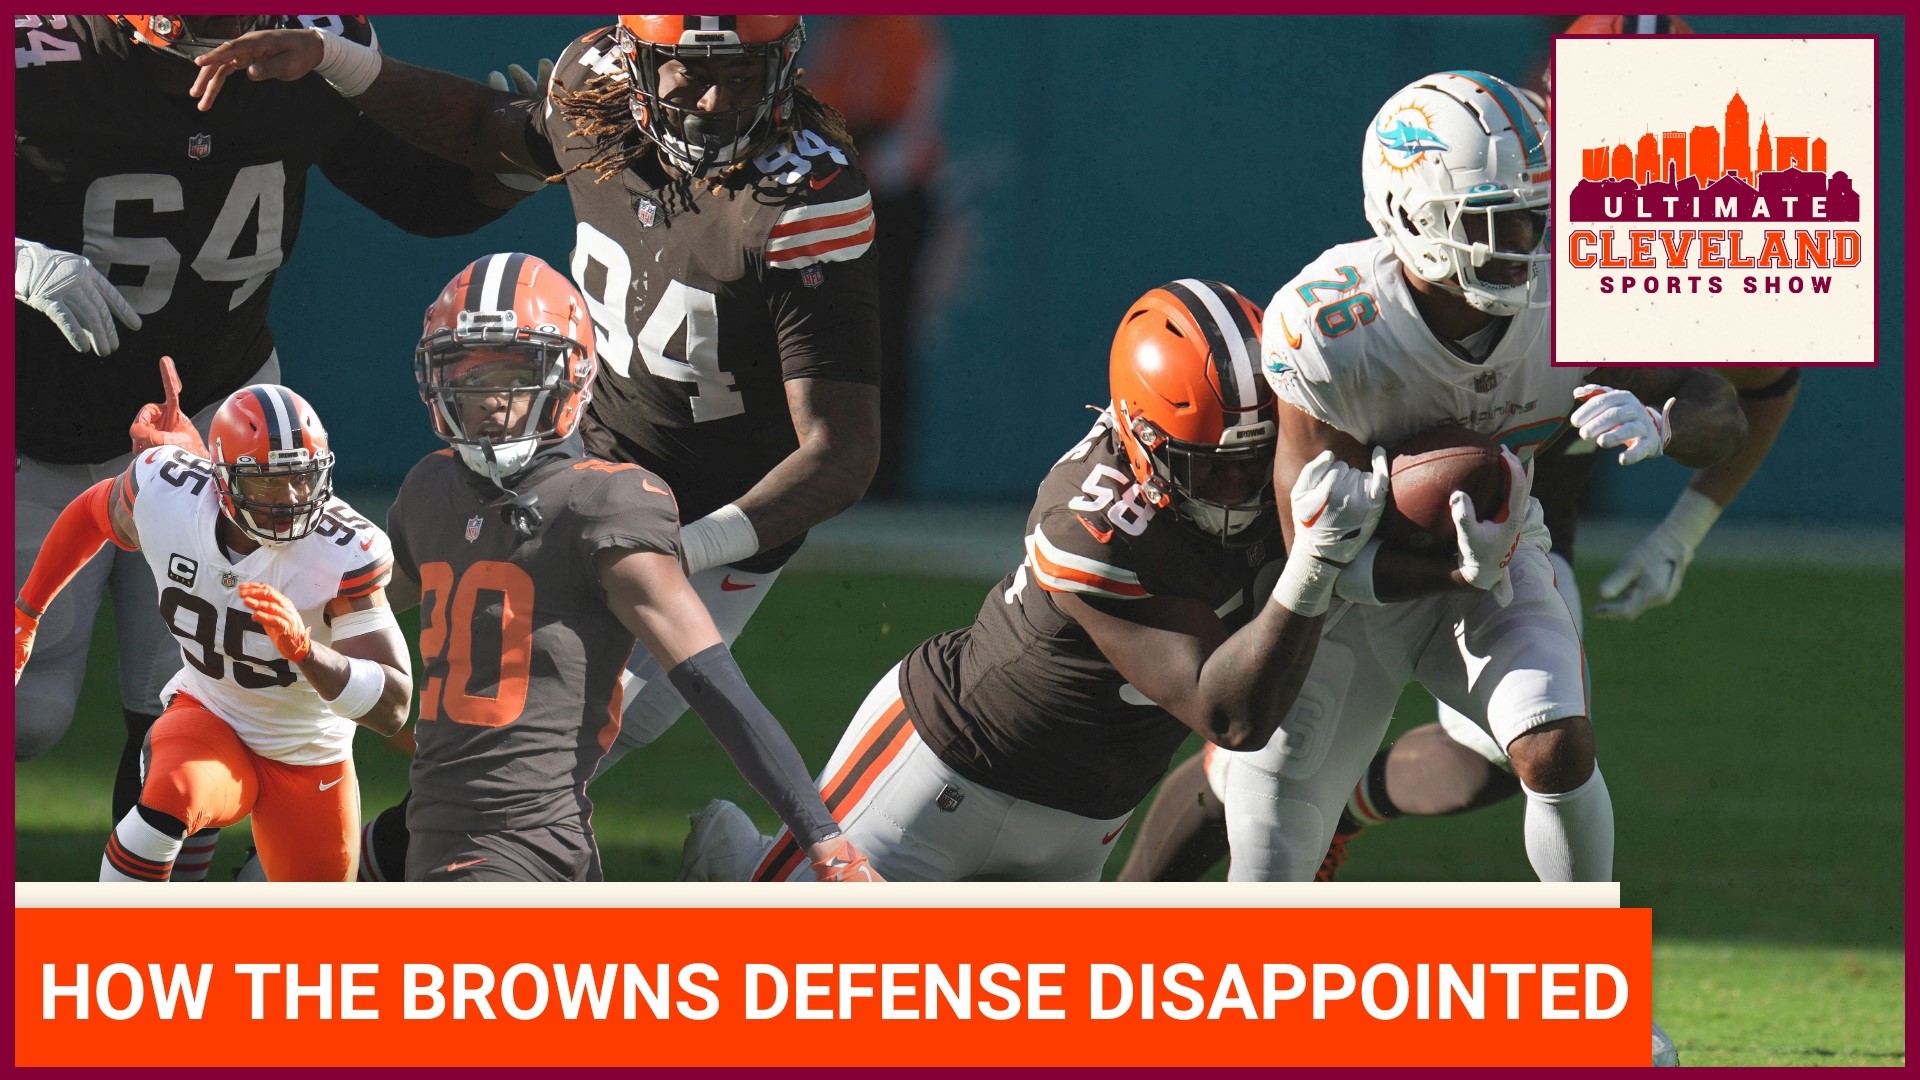 What was the worse part of the Cleveland Browns defense this past season?